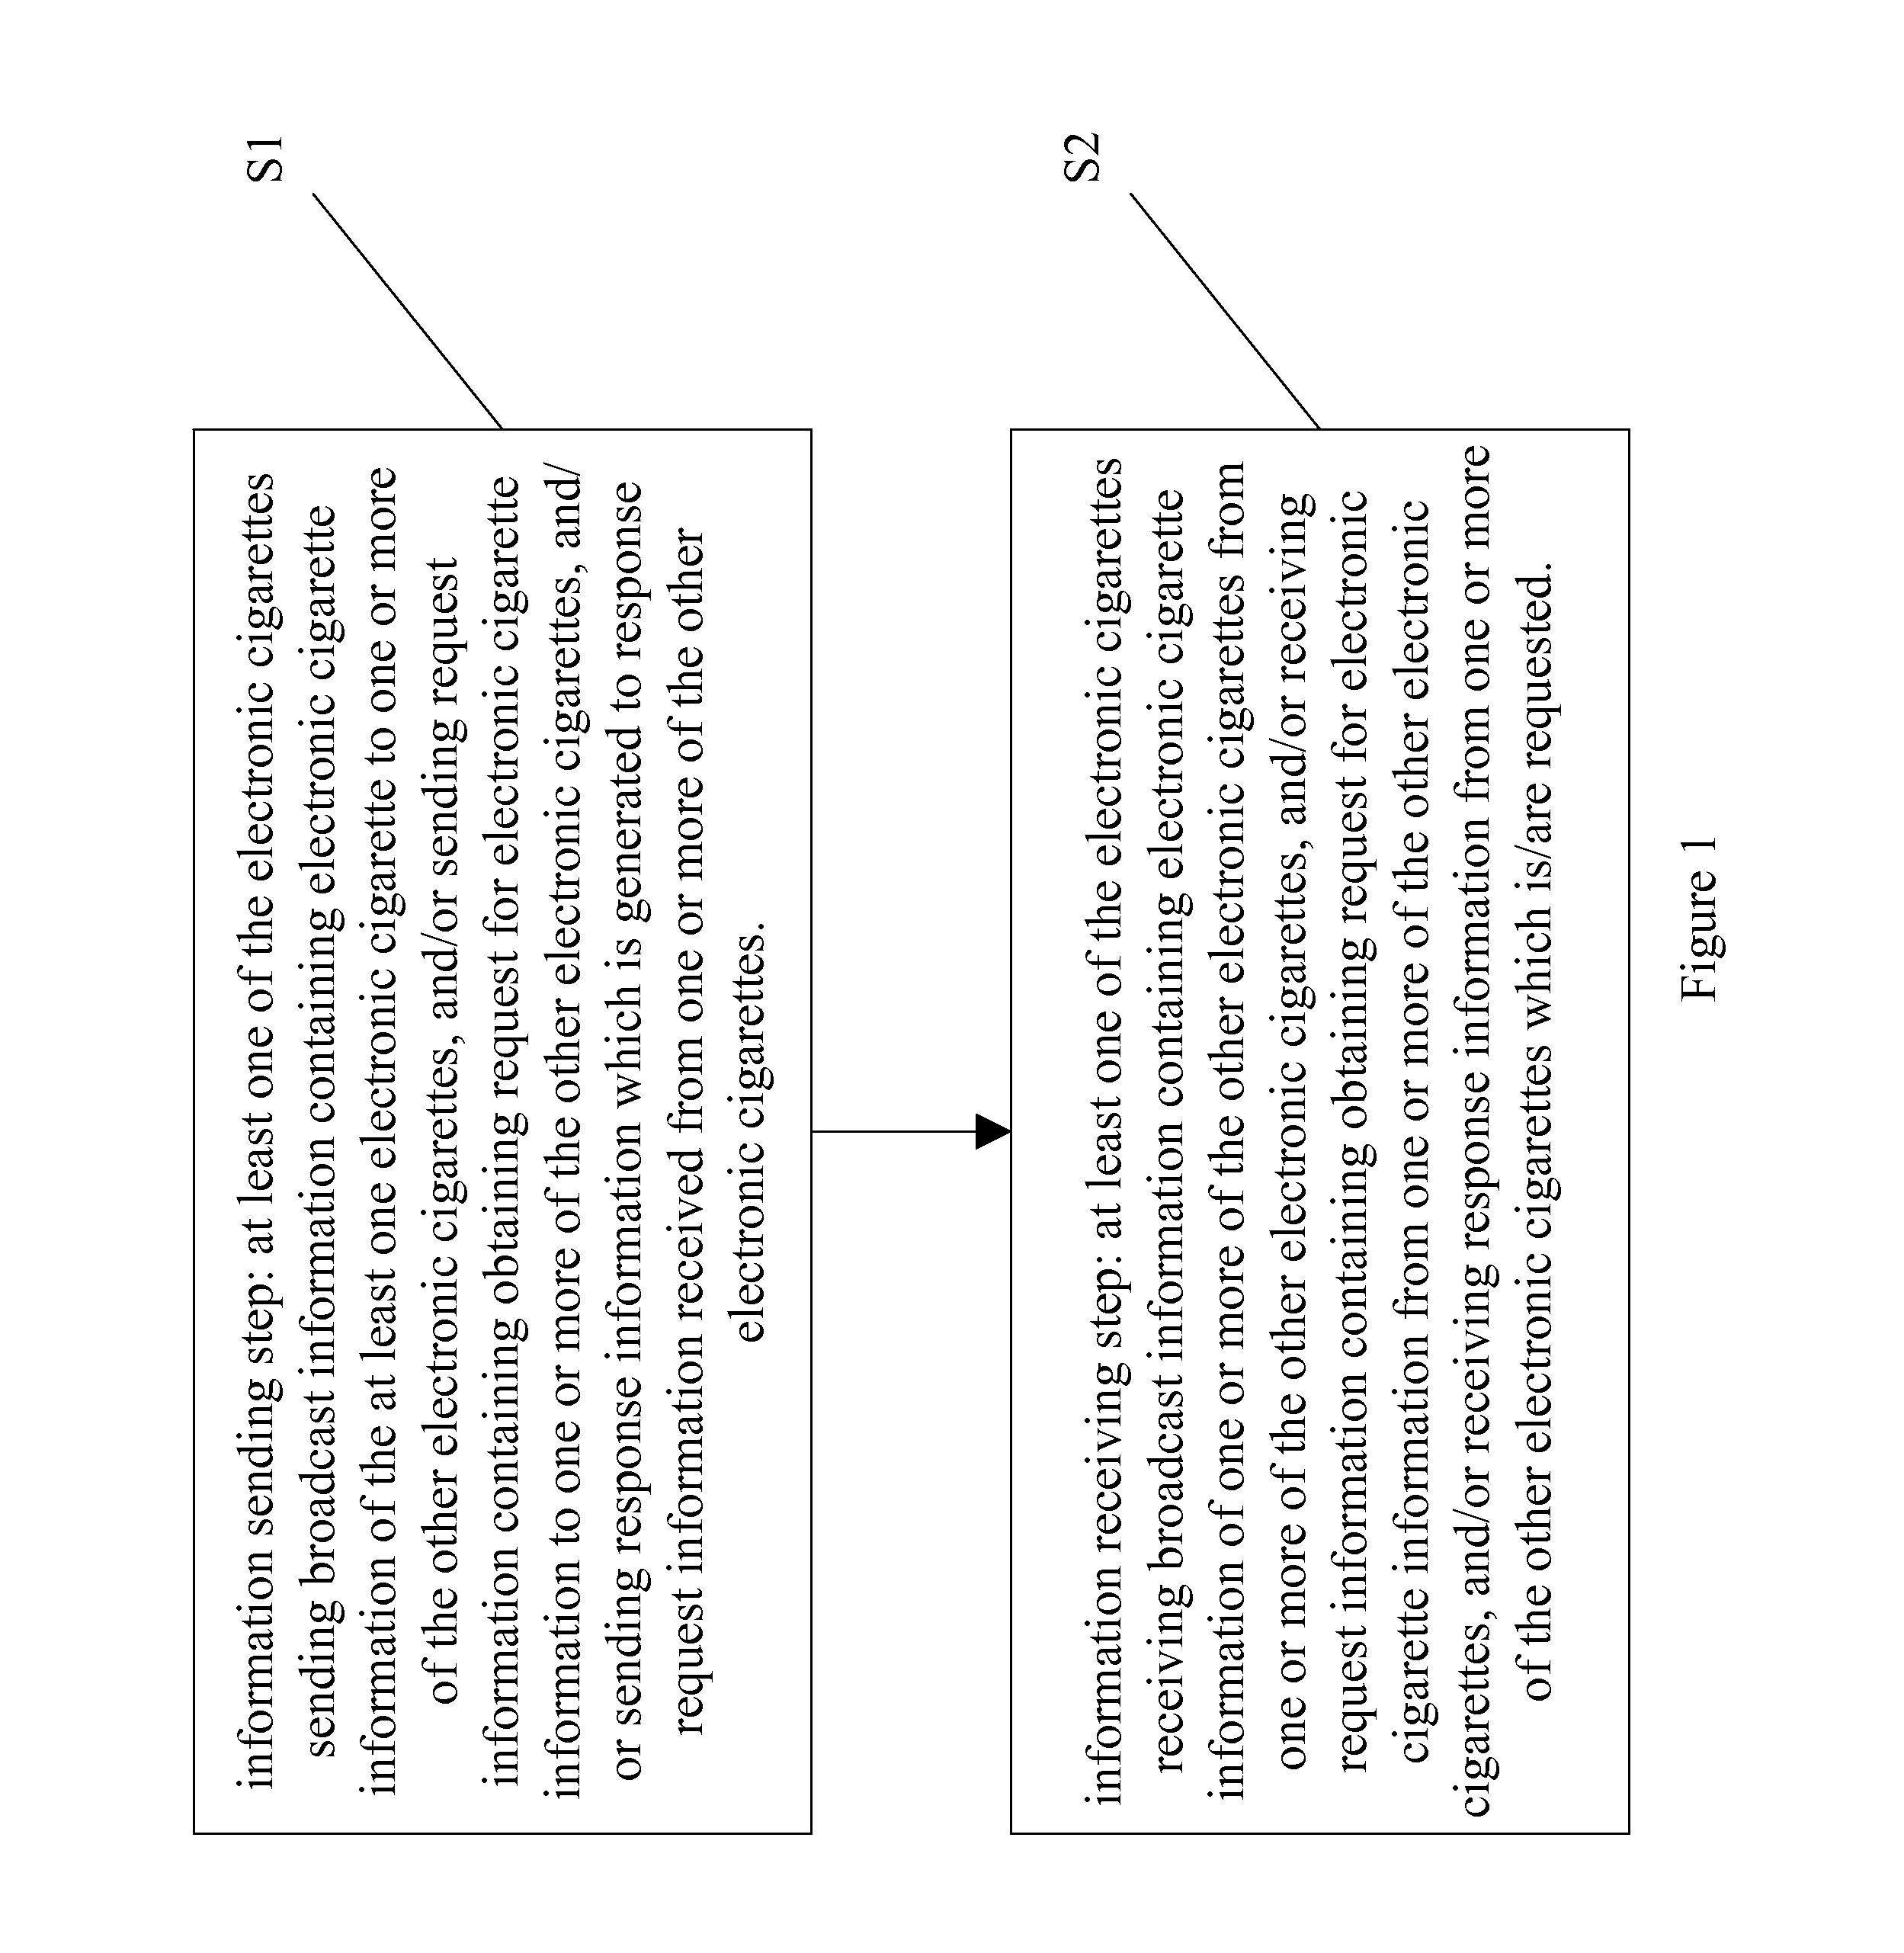 Information interaction method and system for electronic cigarettes